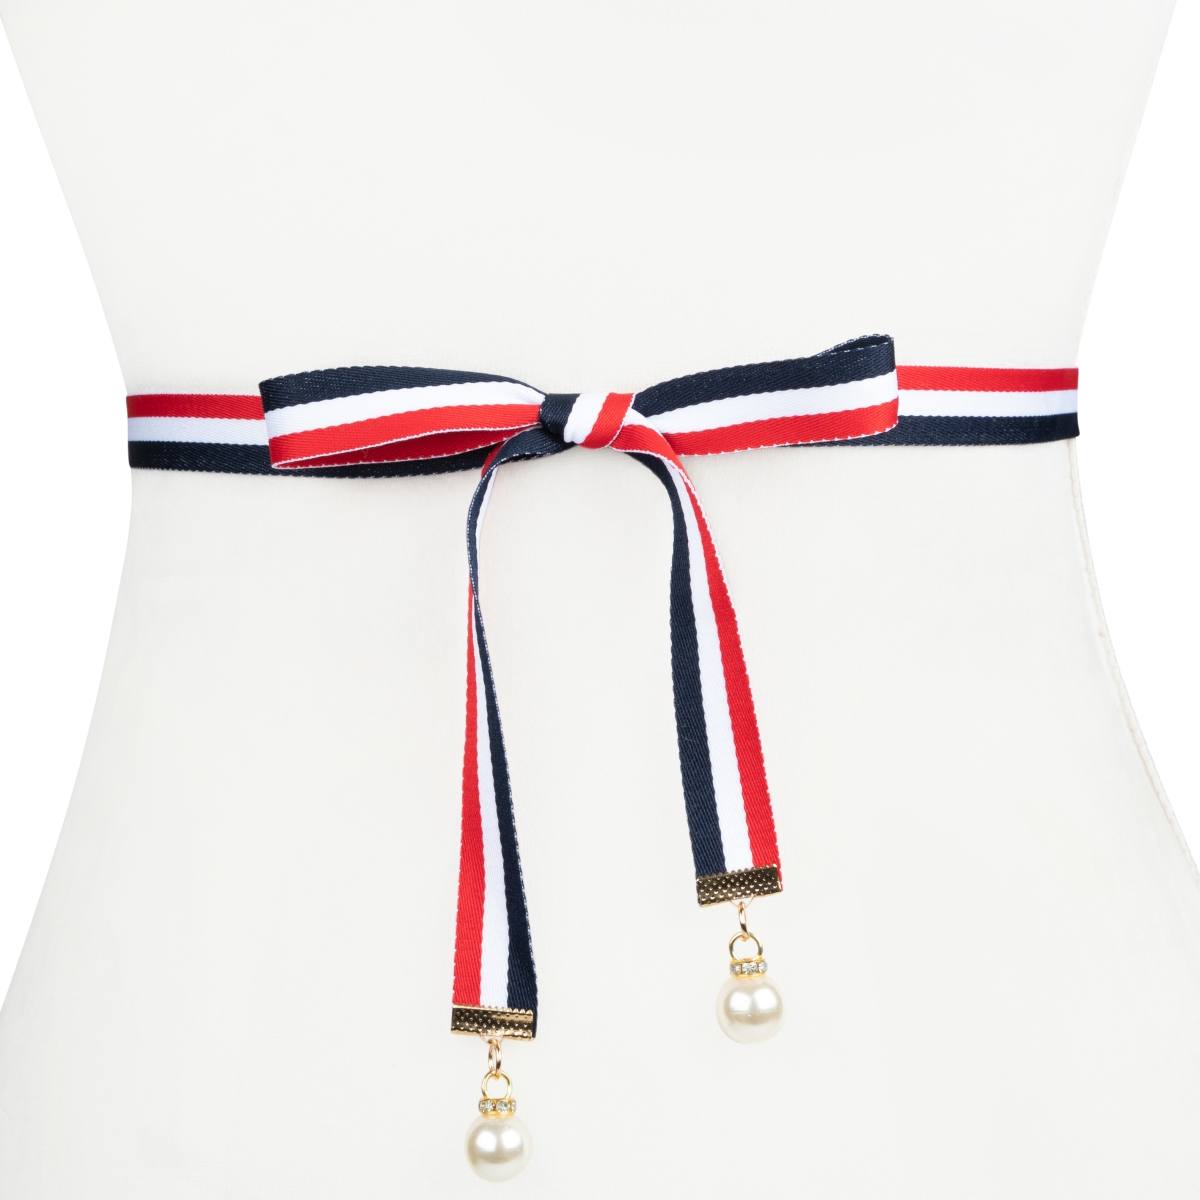 Wj41rwn Womens Designer Pearl Ribbon Belt - Red, White & Navy - Extra Small & Extra Large